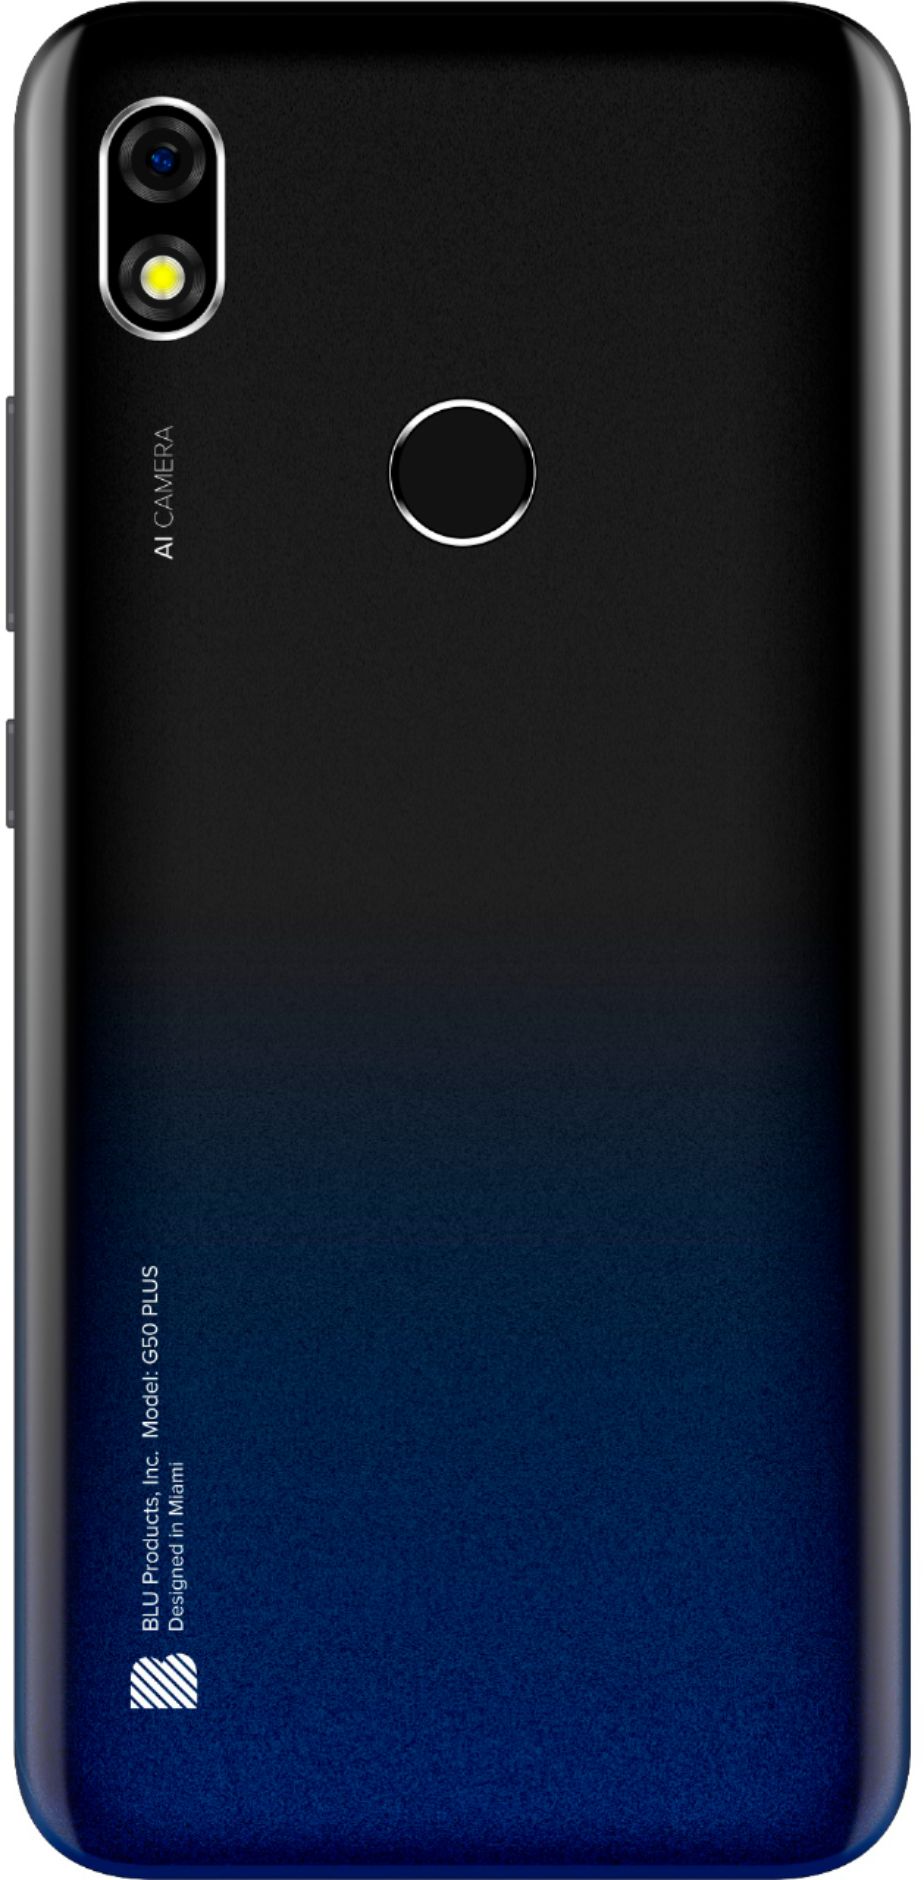 Back View: Google Pixel 4a with 5G - 5G smartphone - RAM 6 GB / Internal Memory 128 GB - OLED display - 6.2" - 2340 x 1080 pixels - 2x rear cameras 12.2 MP, 16 MP - front camera 8 MP - clearly white